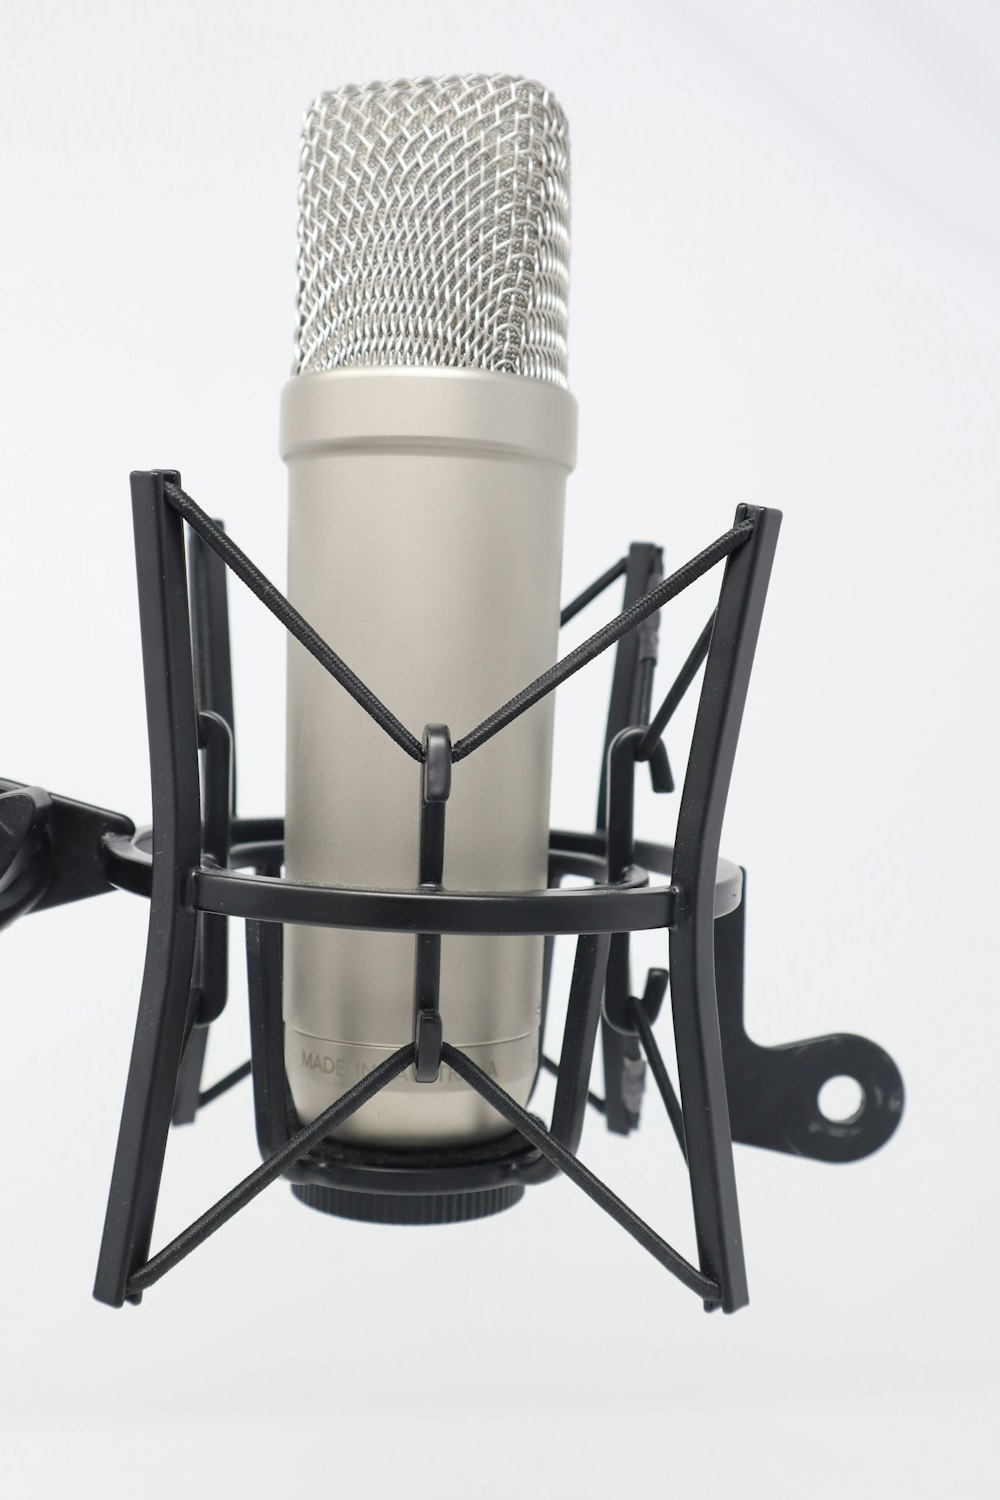 black microphone holder and gray condenser microphone